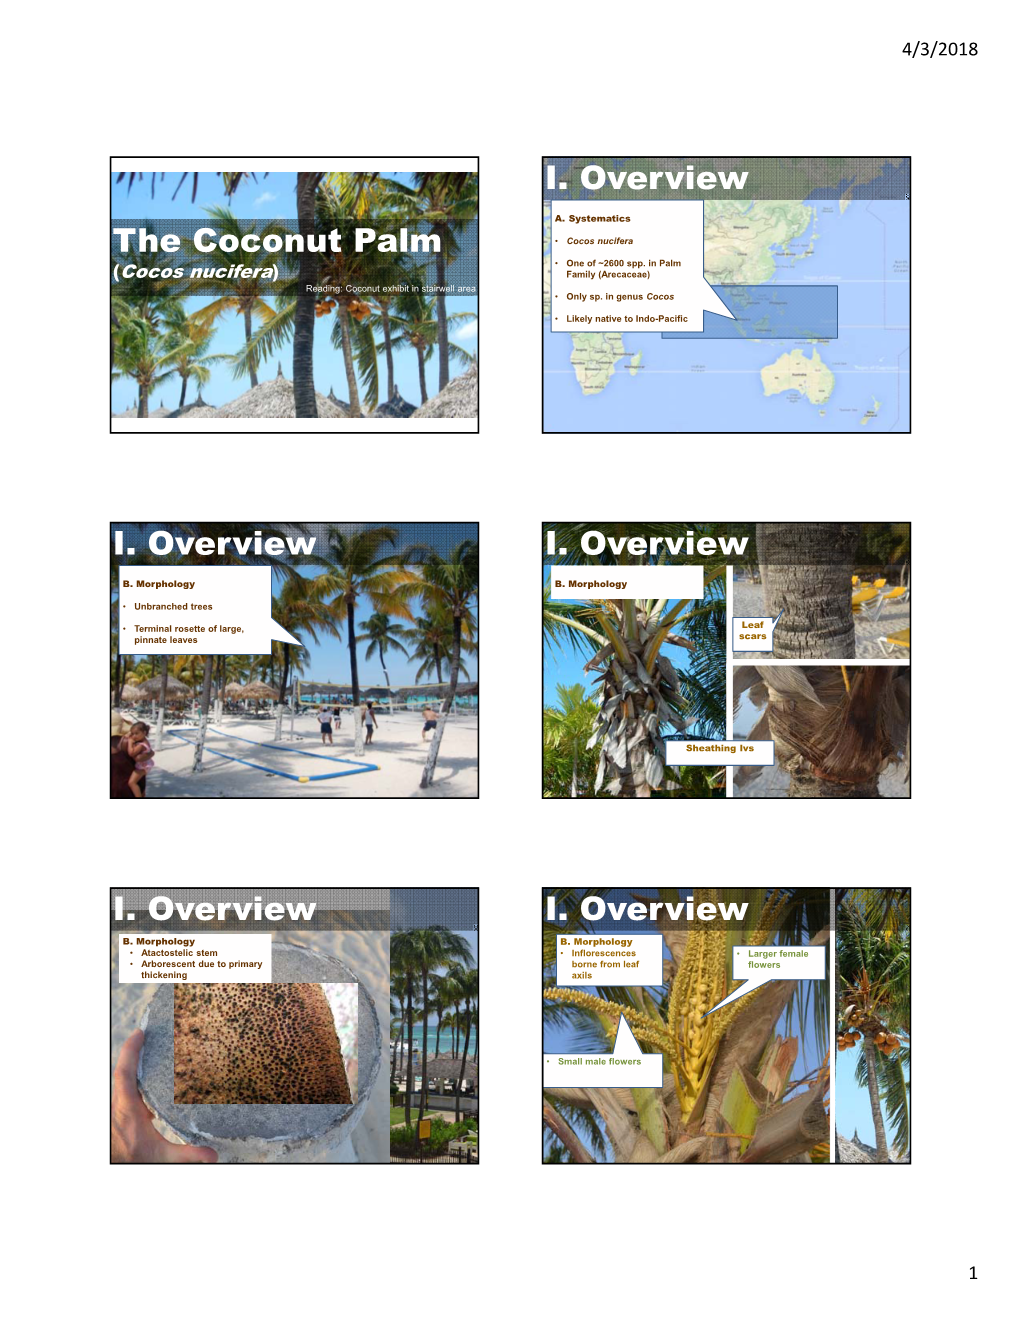 The Coconut Palm I. Overview I. Overview I. Overview I. Overview I